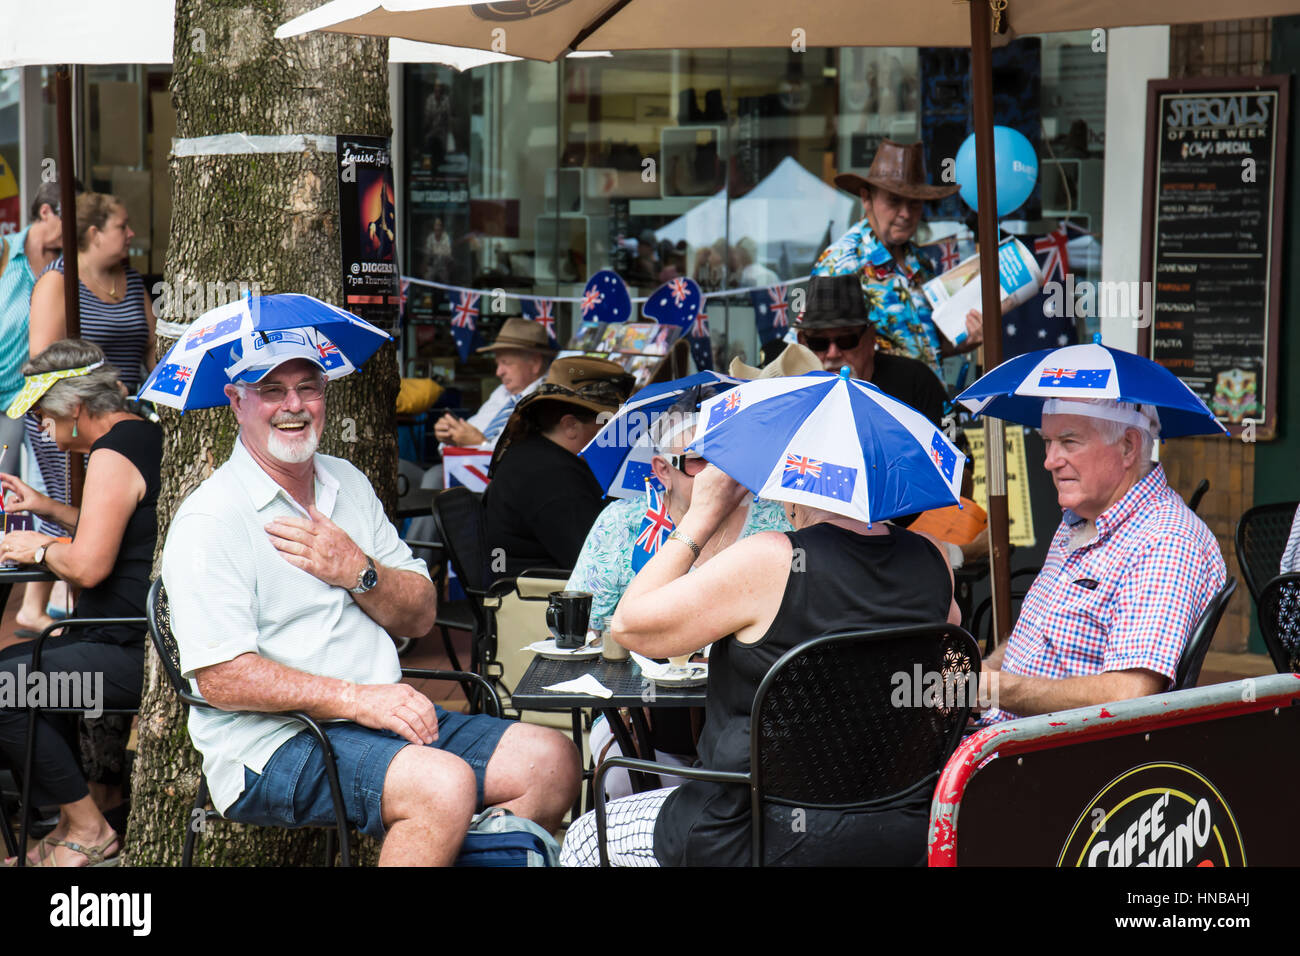 Outdoor Diners wearing sun umbrellas Australia Day 2017 at Tamworth Country Music Festival Stock Photo